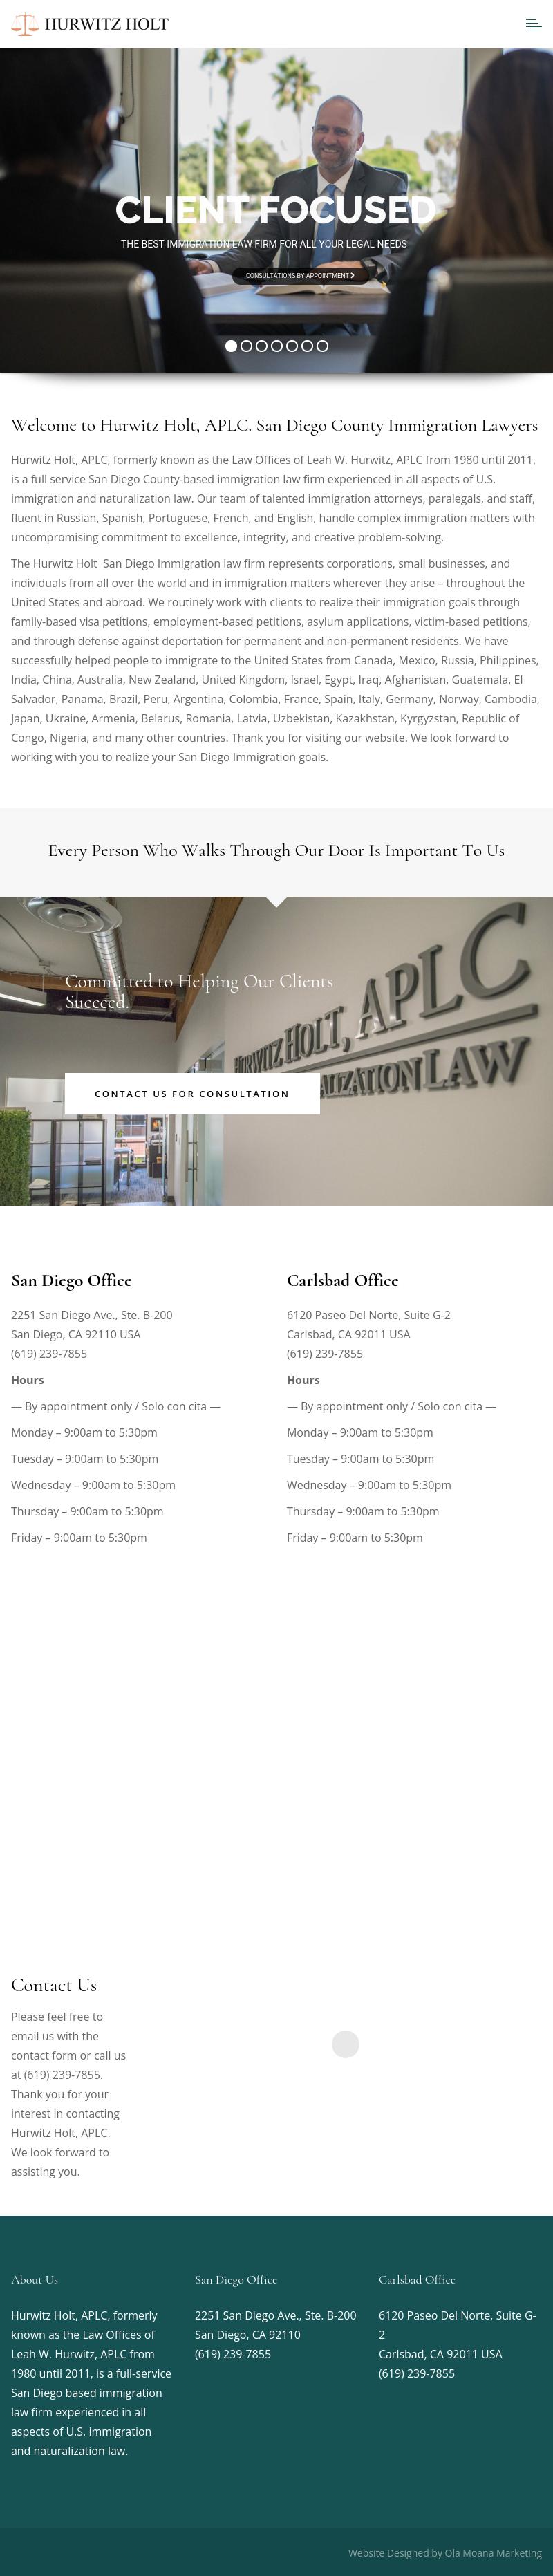 Law Offices Of Hurwitz Holt APLC - San Diego CA Lawyers